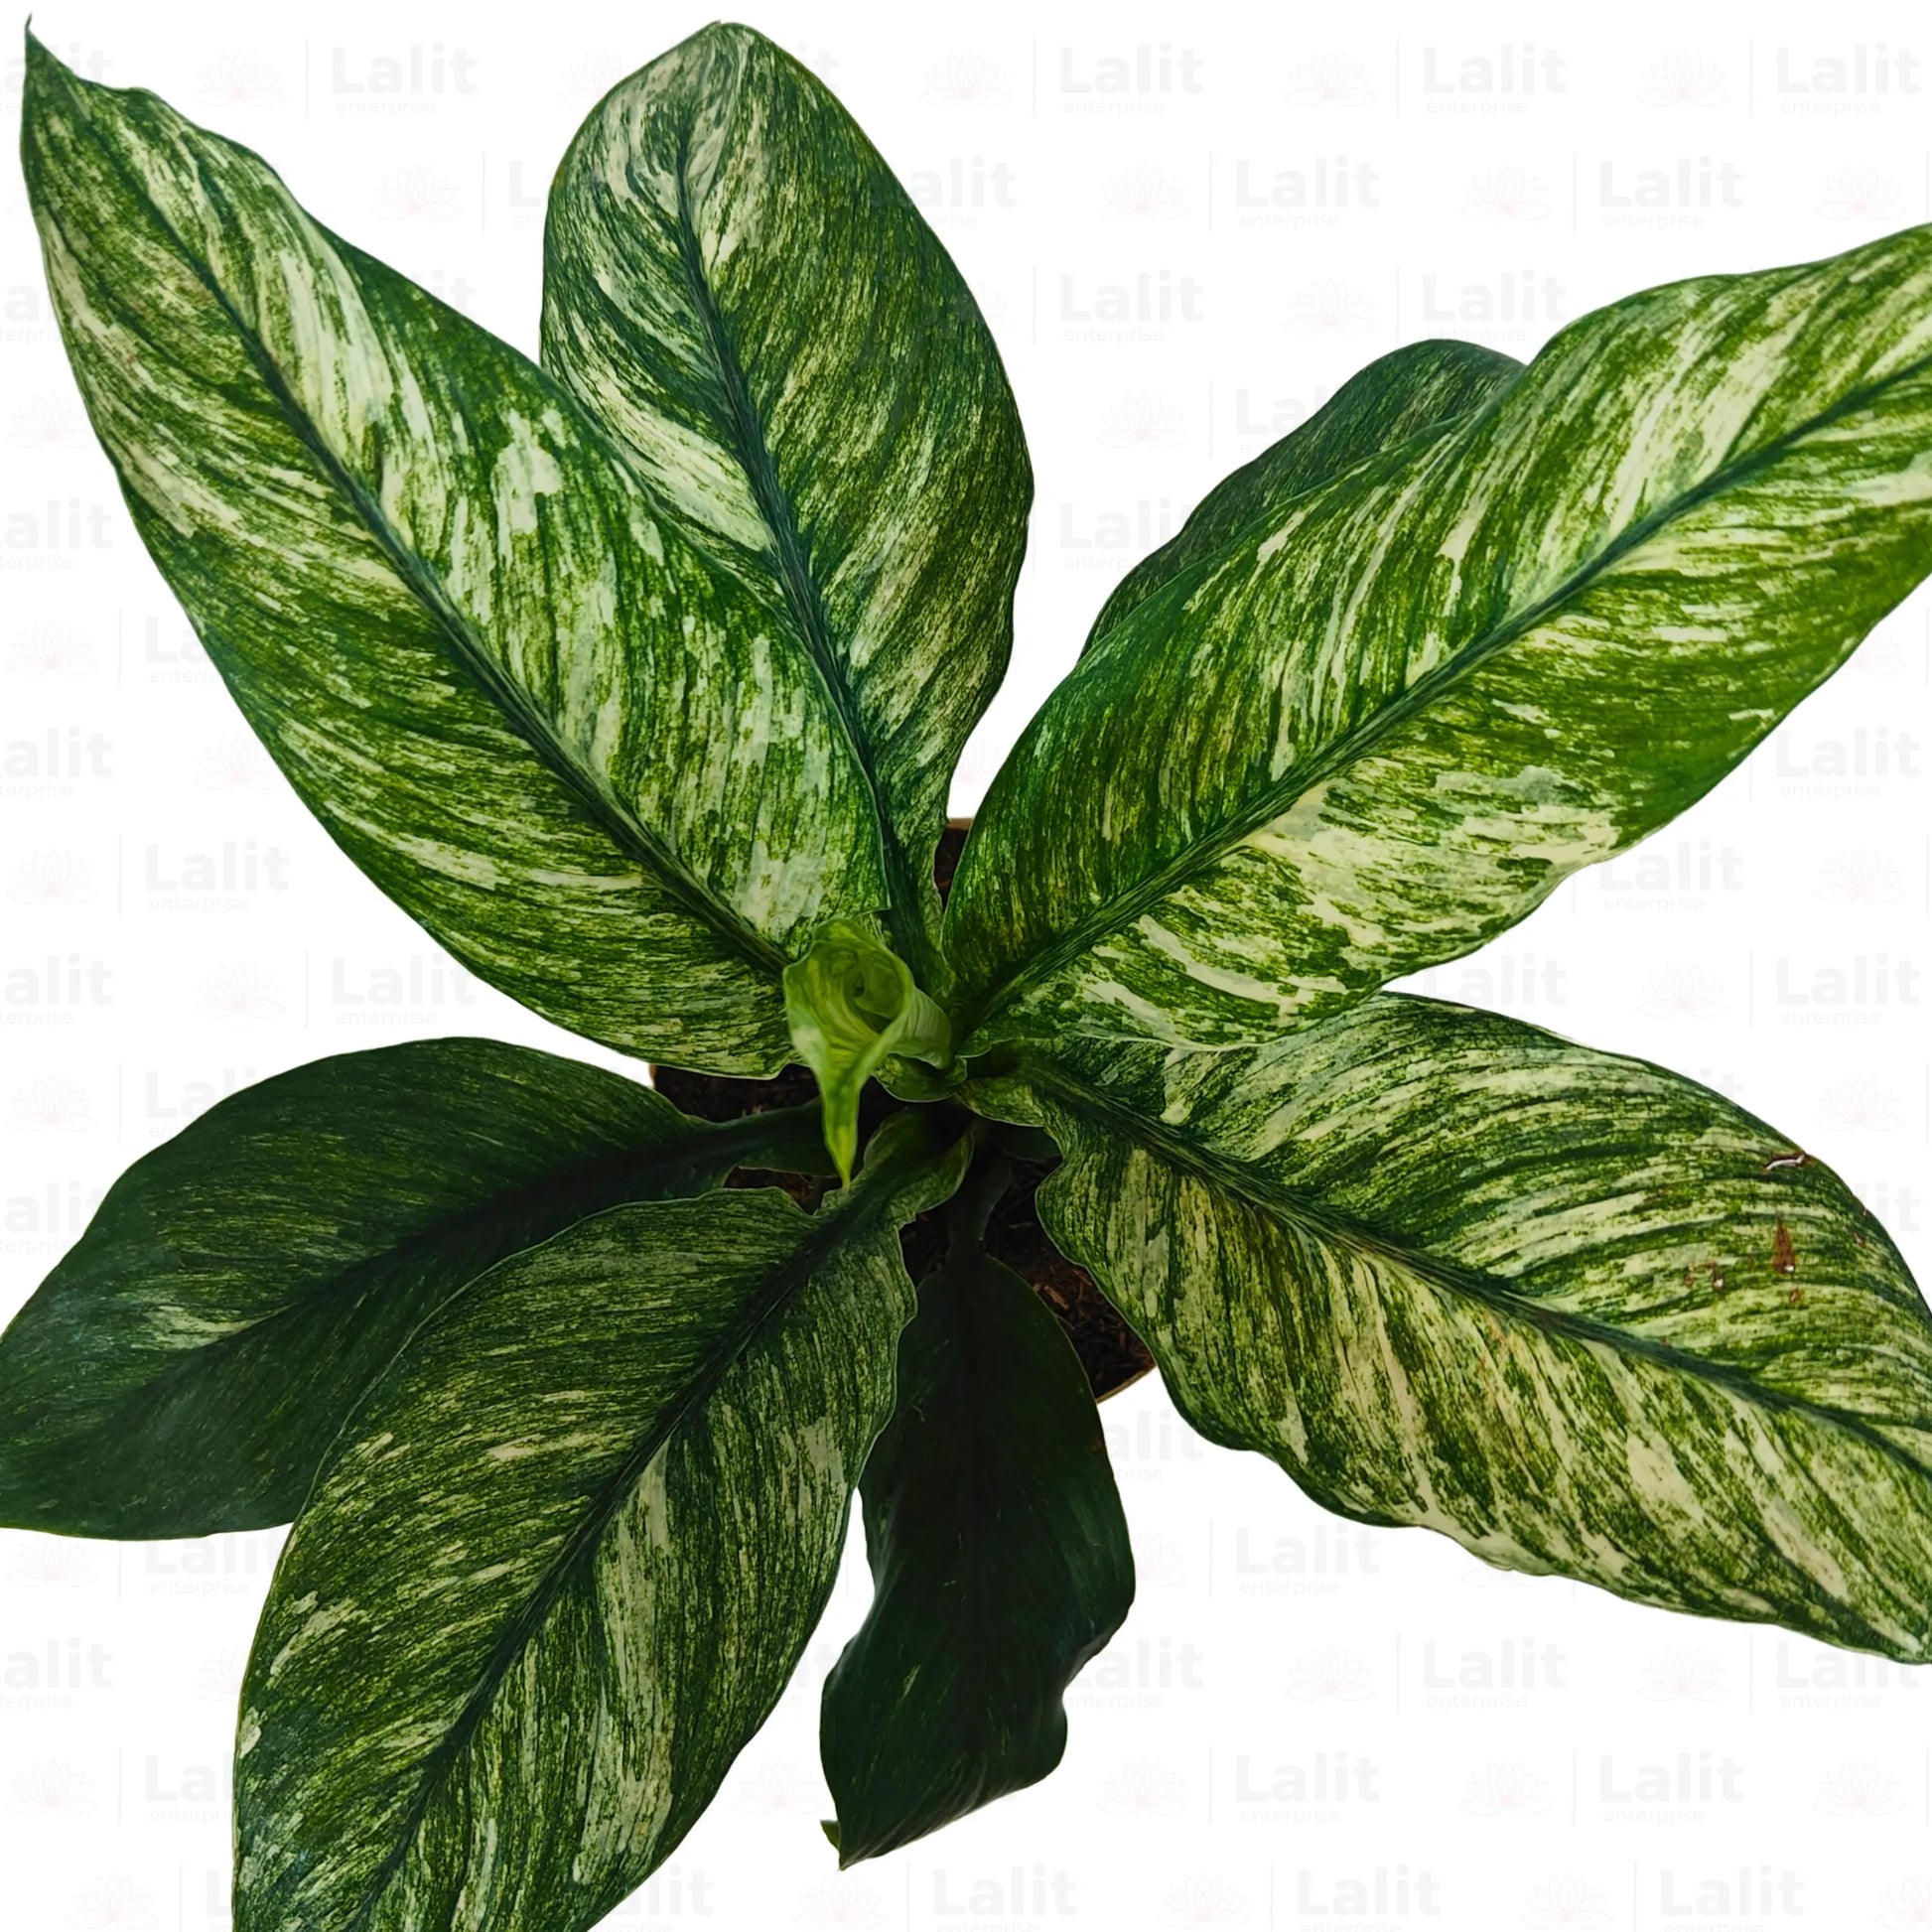 Buy Variegated Peace Lily - Plant Online at Lalitenterprise